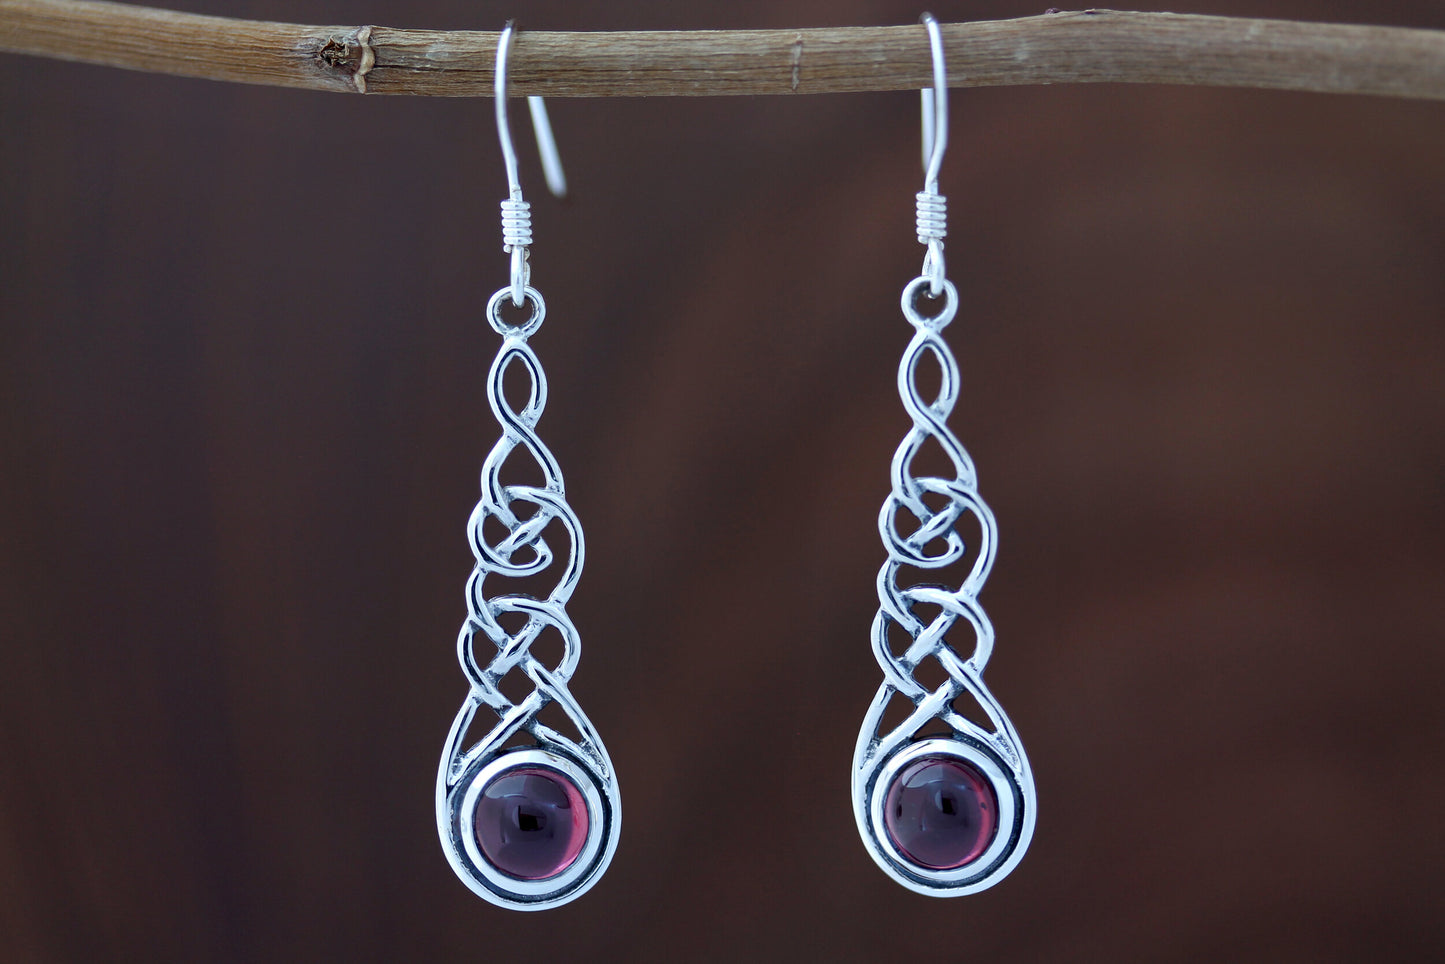 Celtic Knot Earrings - Thin Weave with Red Garnet